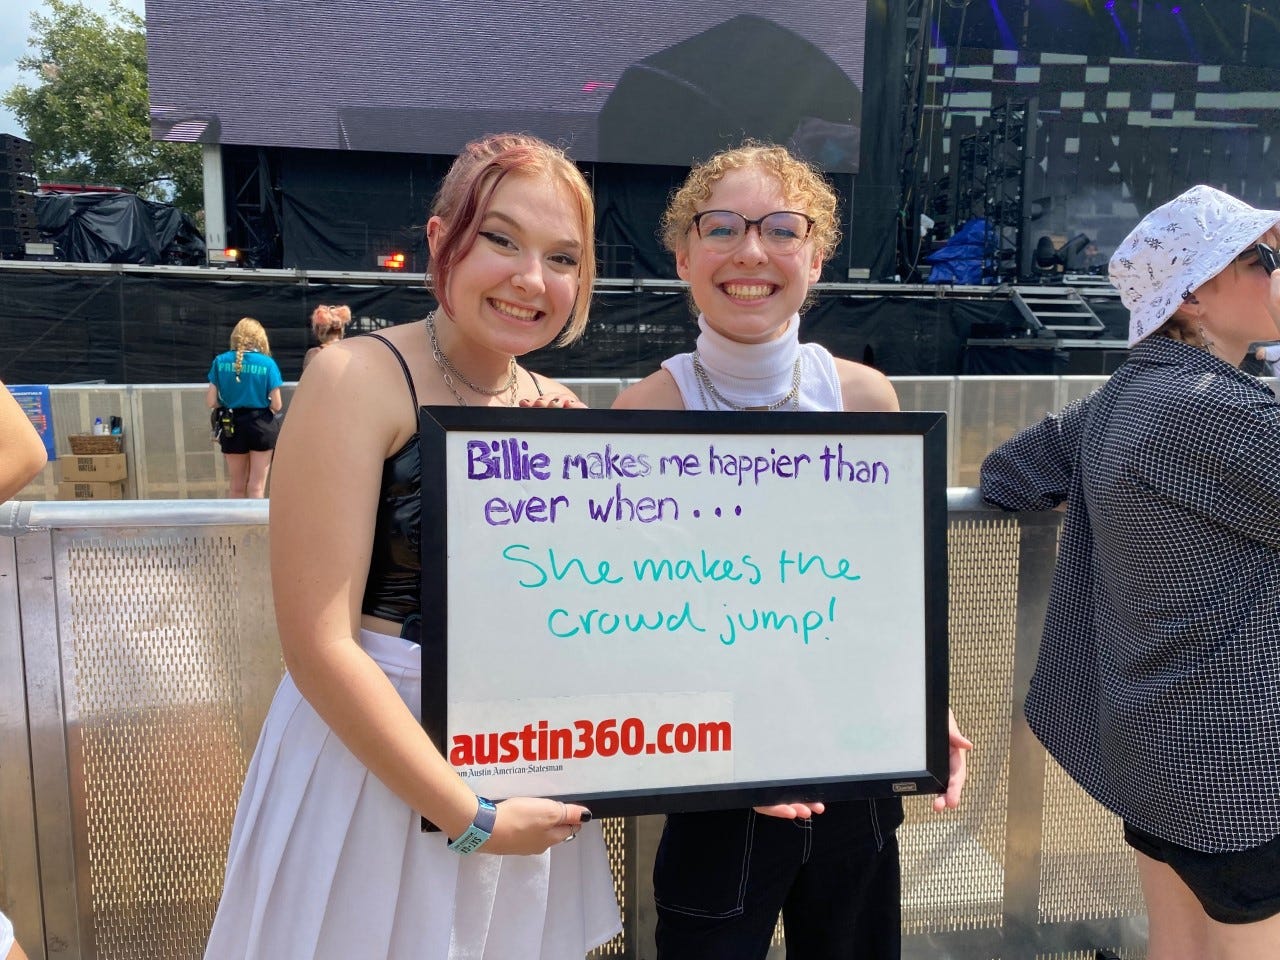 Jenni Long, 17, left, and Delanie Free, 17, waiting for the Billie Eilish show on Saturday Oct. 2, 2021. Both are from Lubbock, Texas.